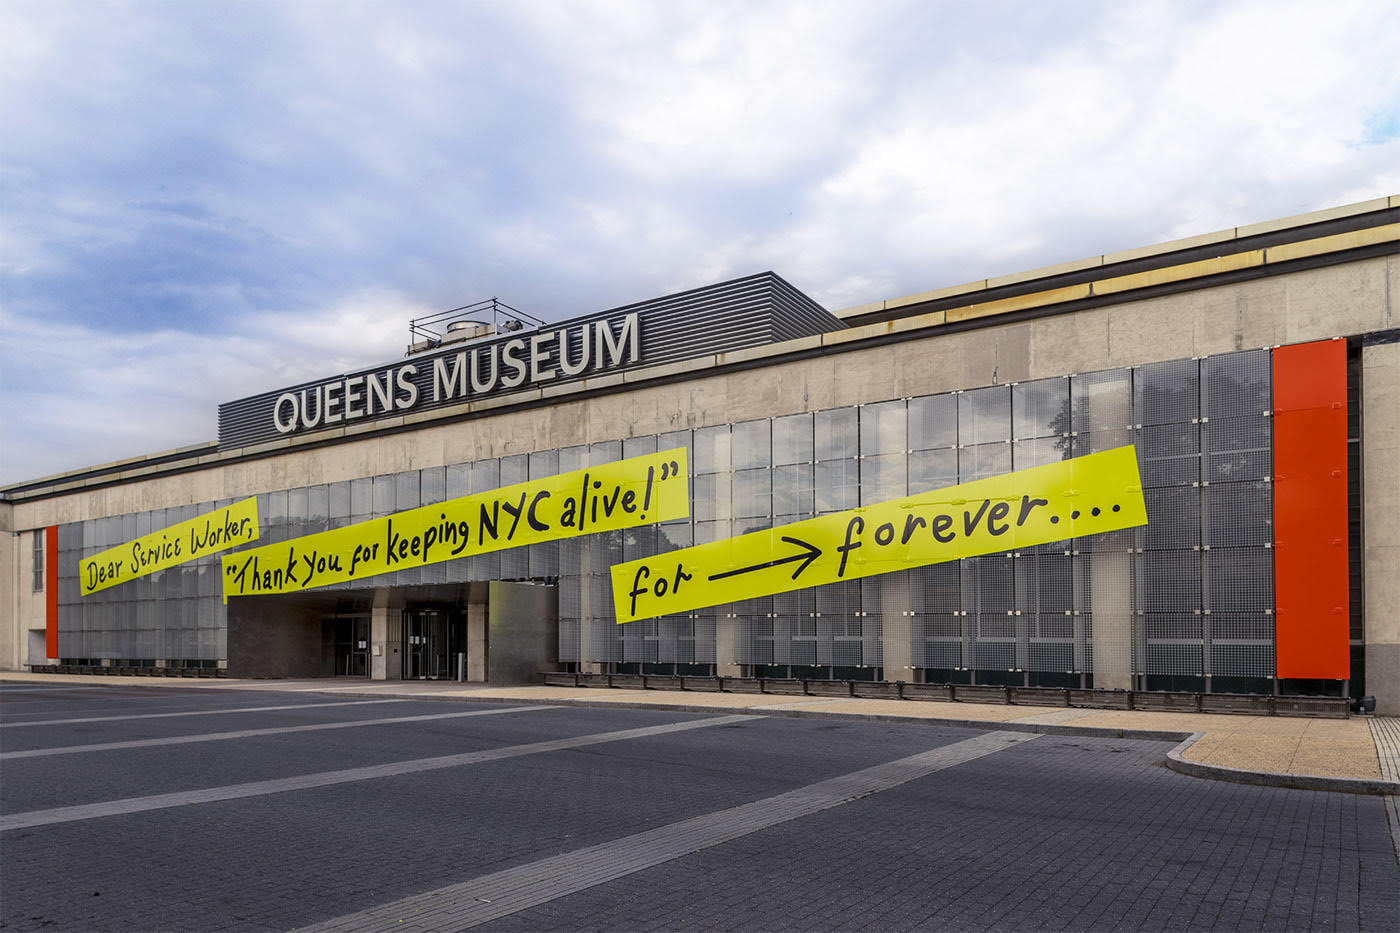 Installed on the facade of the Queens Museum is a yellow, three part banner with the phrase “Dear Service Worker, “Thank you for keeping NYC alive!” for → forever…”, written in black ink. At the top of the building is a sign that reads “Queens Museum”.